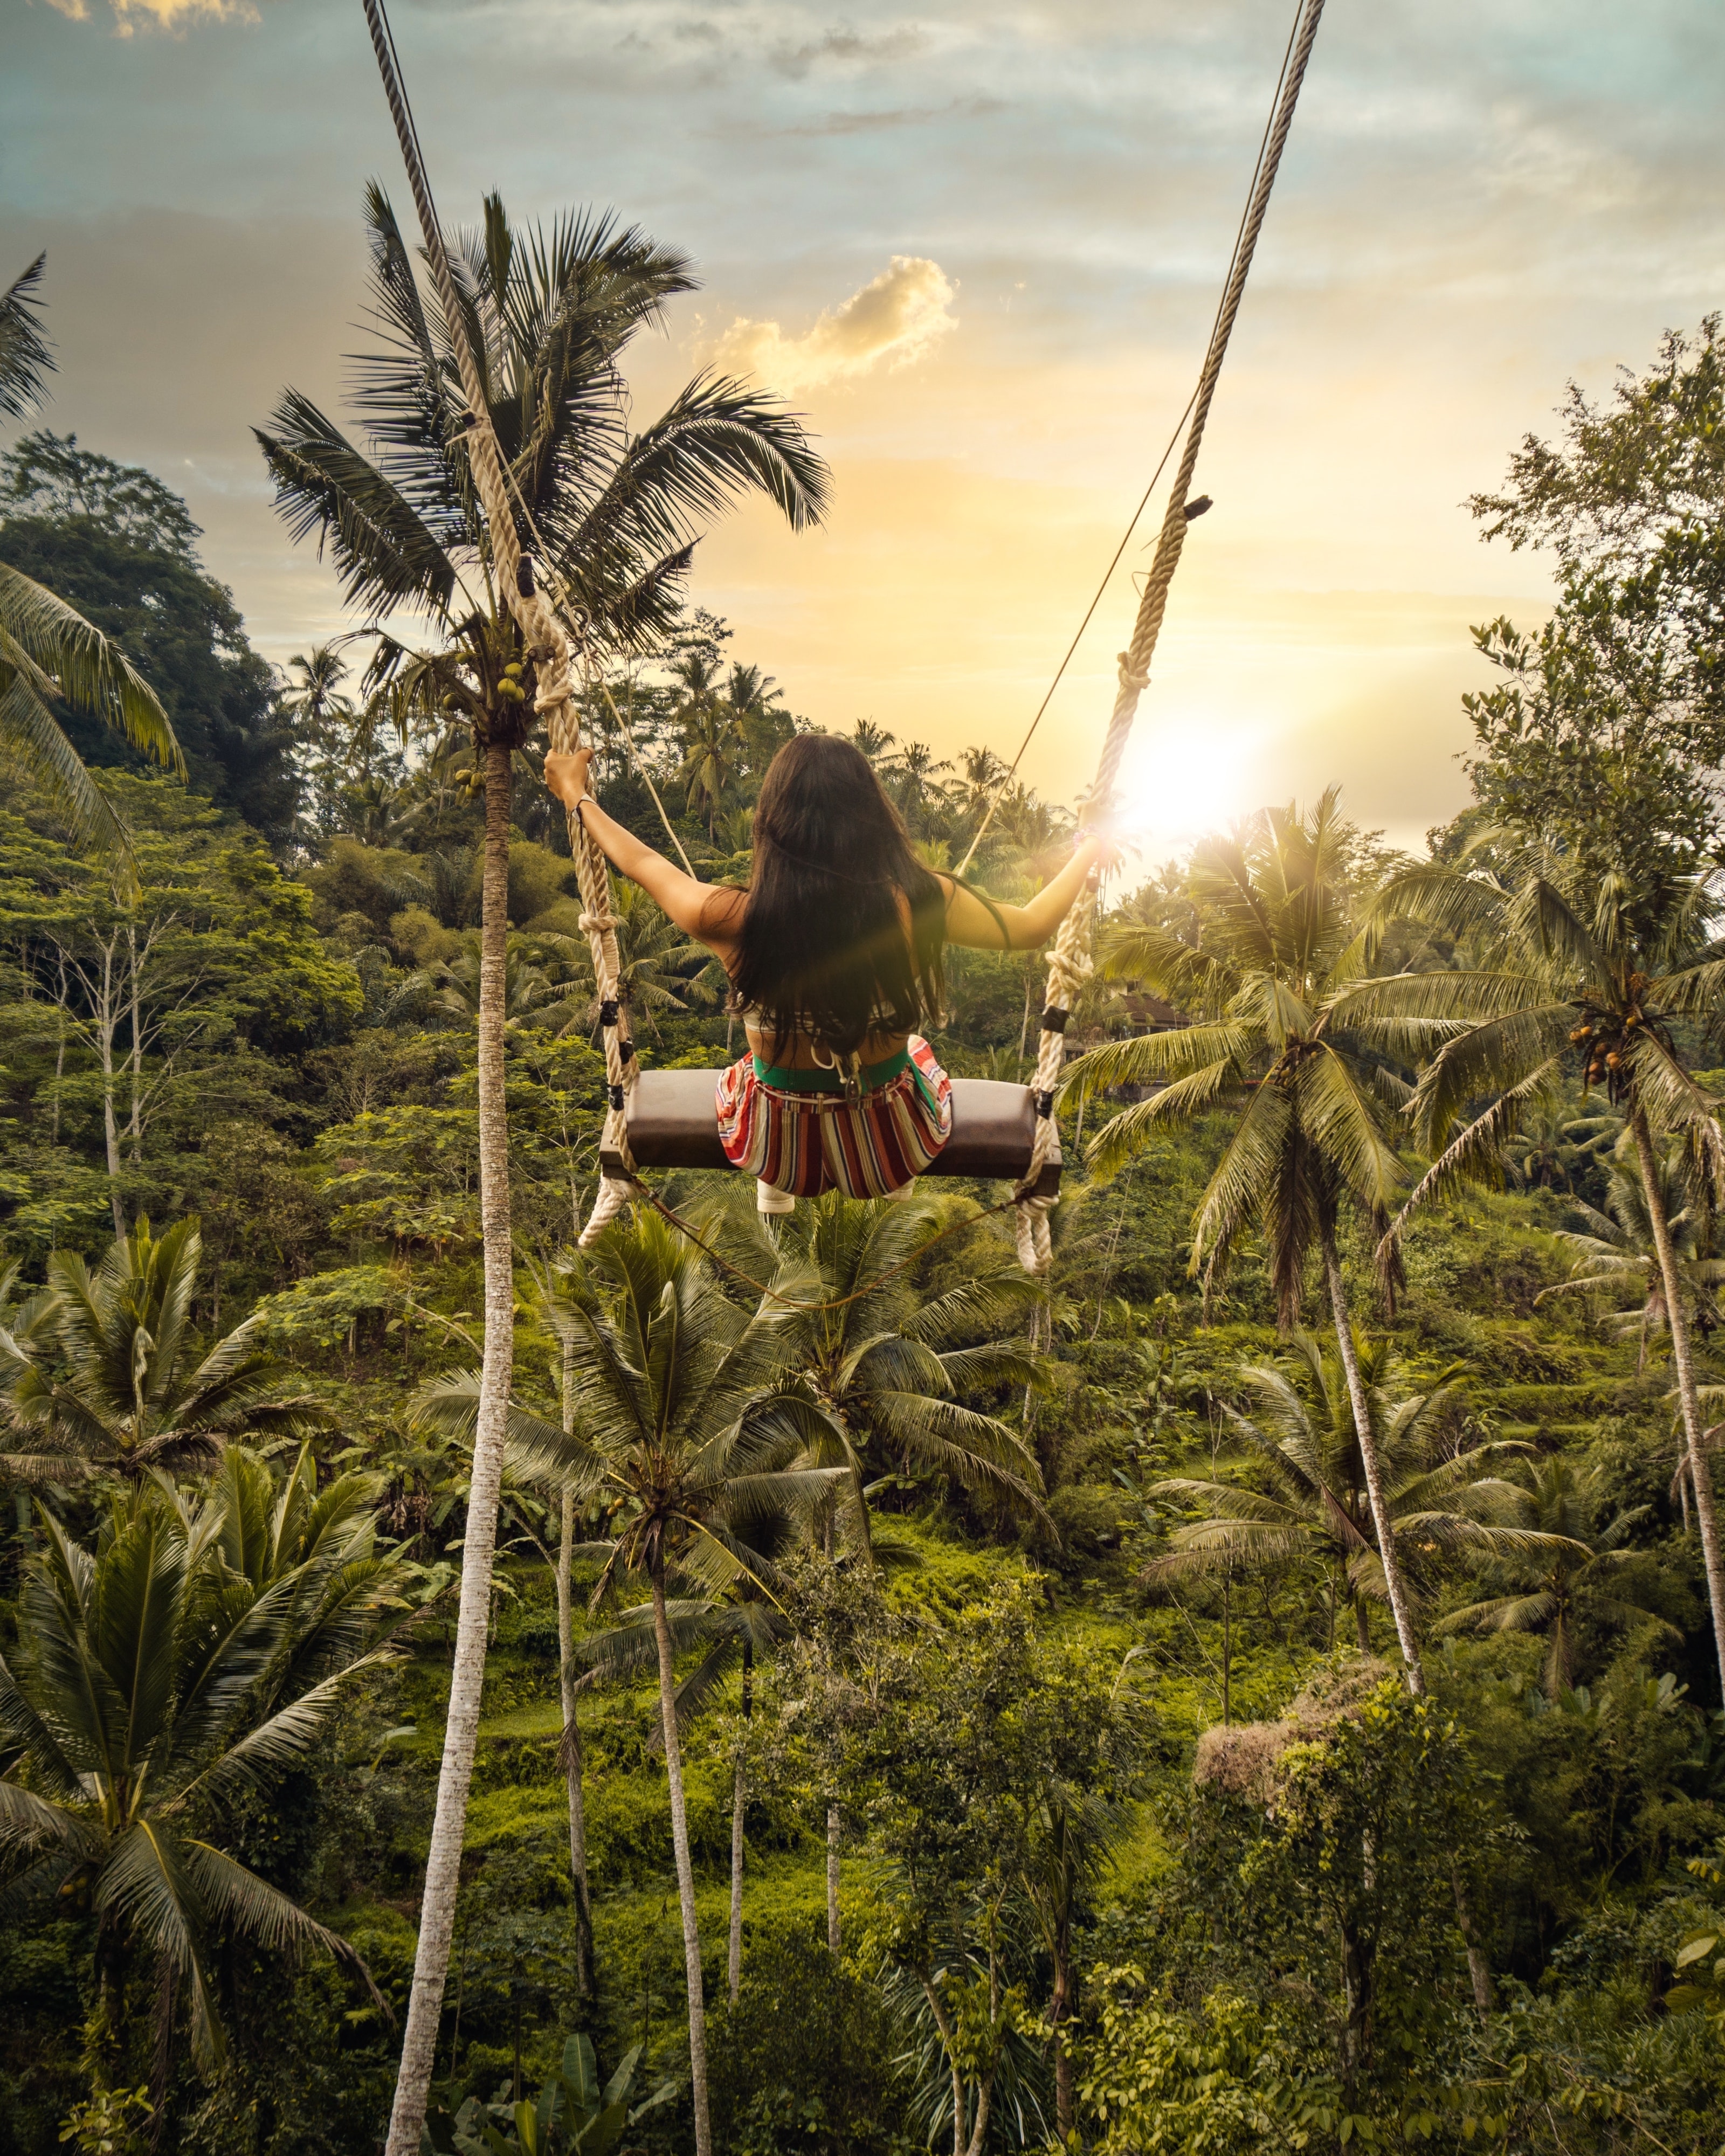 Girl on jungle swing in Tegalalang Ubud Rice Terraces in Bali Indonesia. Photo by : Darren Lawrence (unsplash.com)